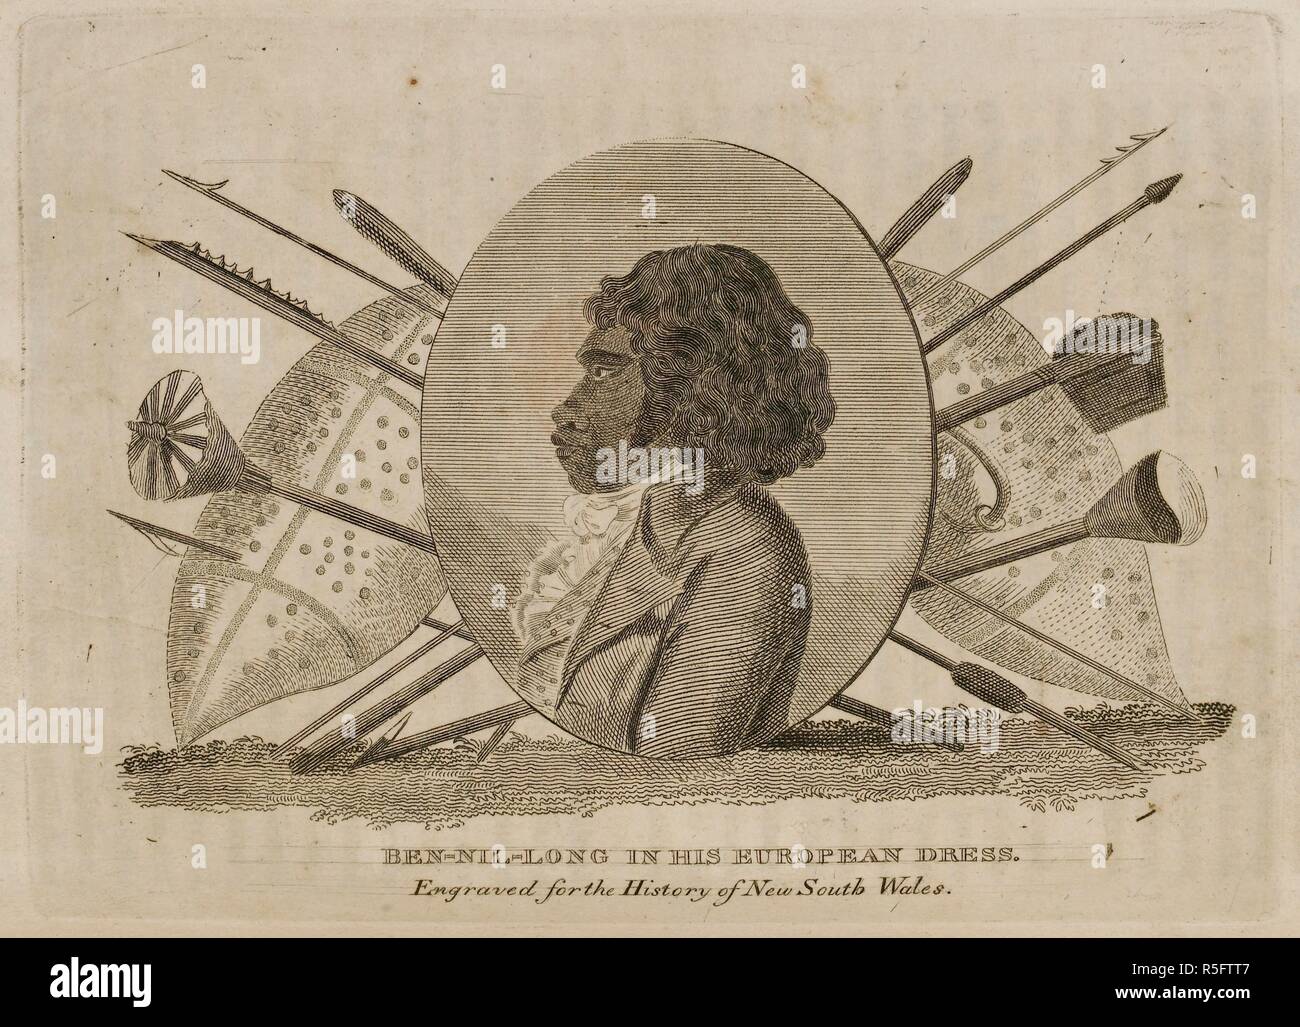 Ben-Nil-Long in his European dress'. A profile of an Aboriginal man in  European dress, bust; oval portrait with Aboriginal weapons behind, e.g.  spears and shields. The subject, Woollarawarre Bennelong (c. 1764 â€“